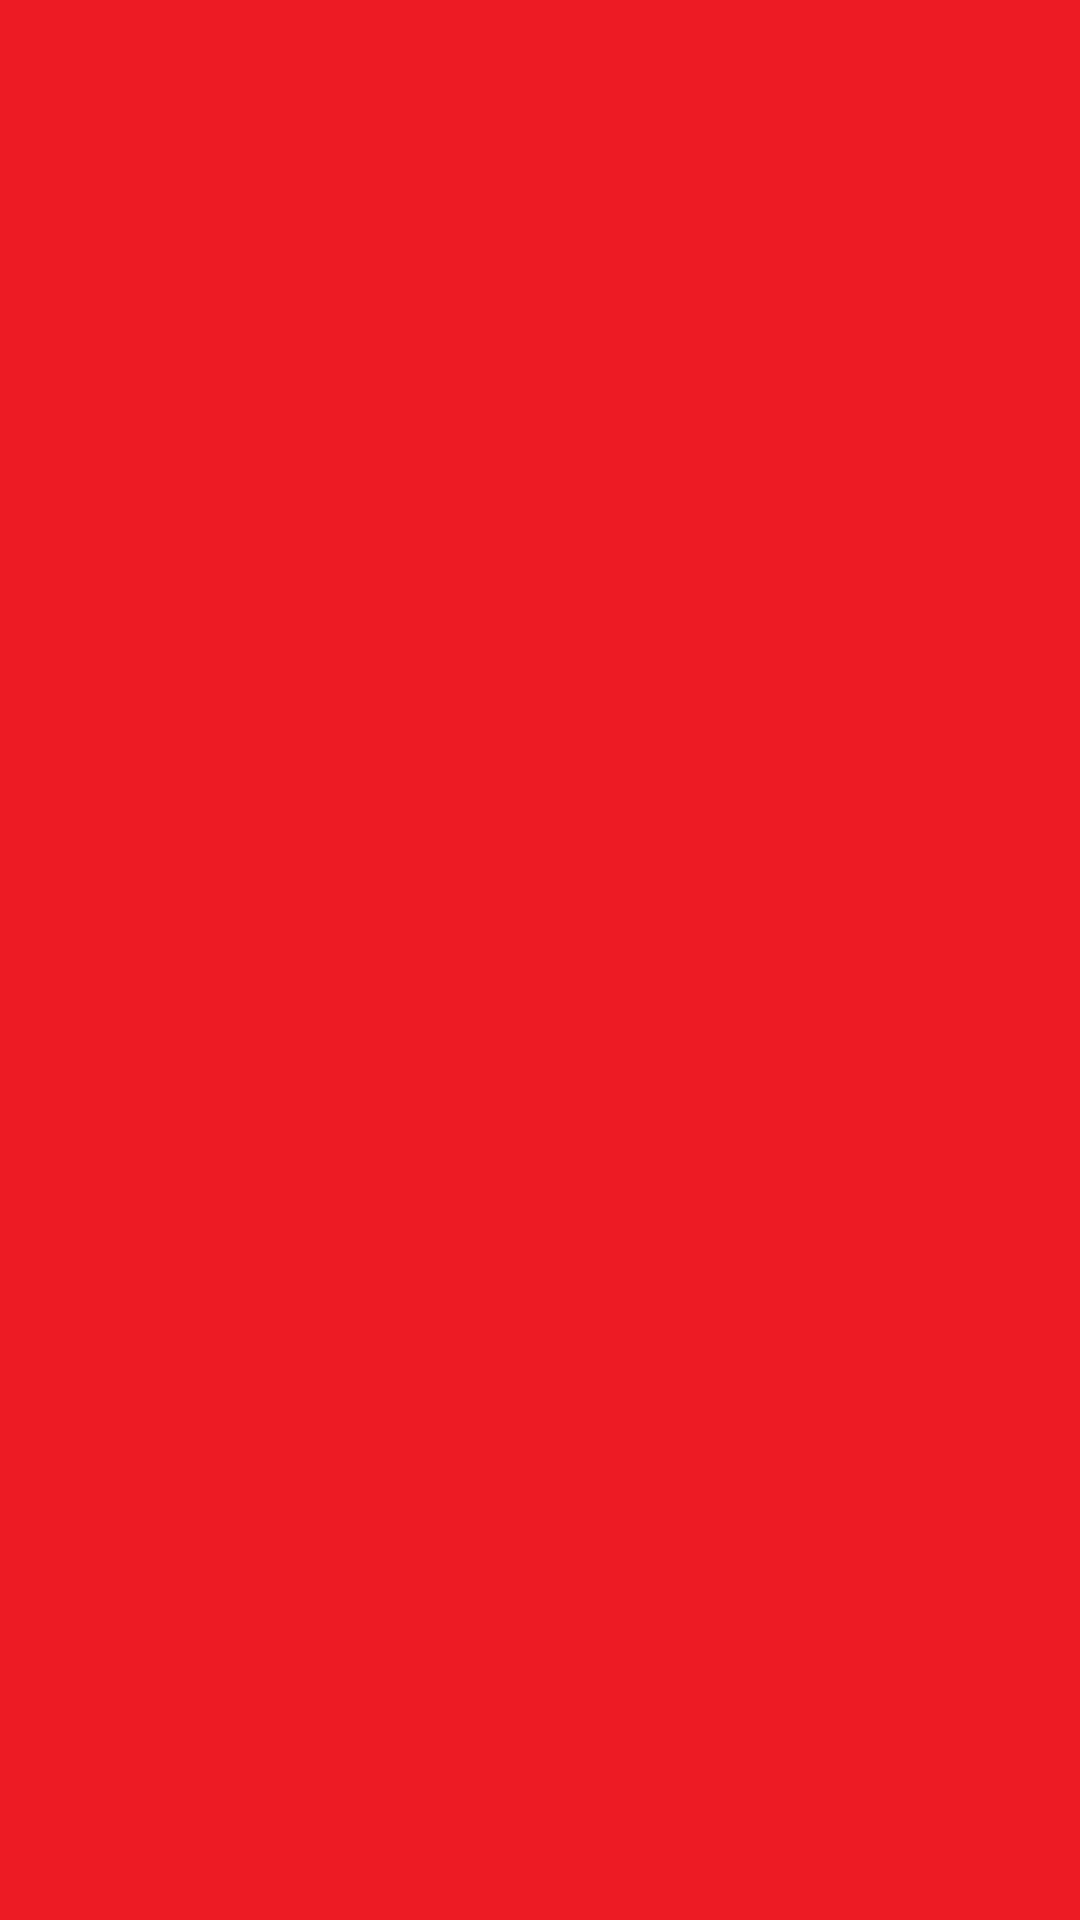 1080x1920 Red Pigment Solid Color Background